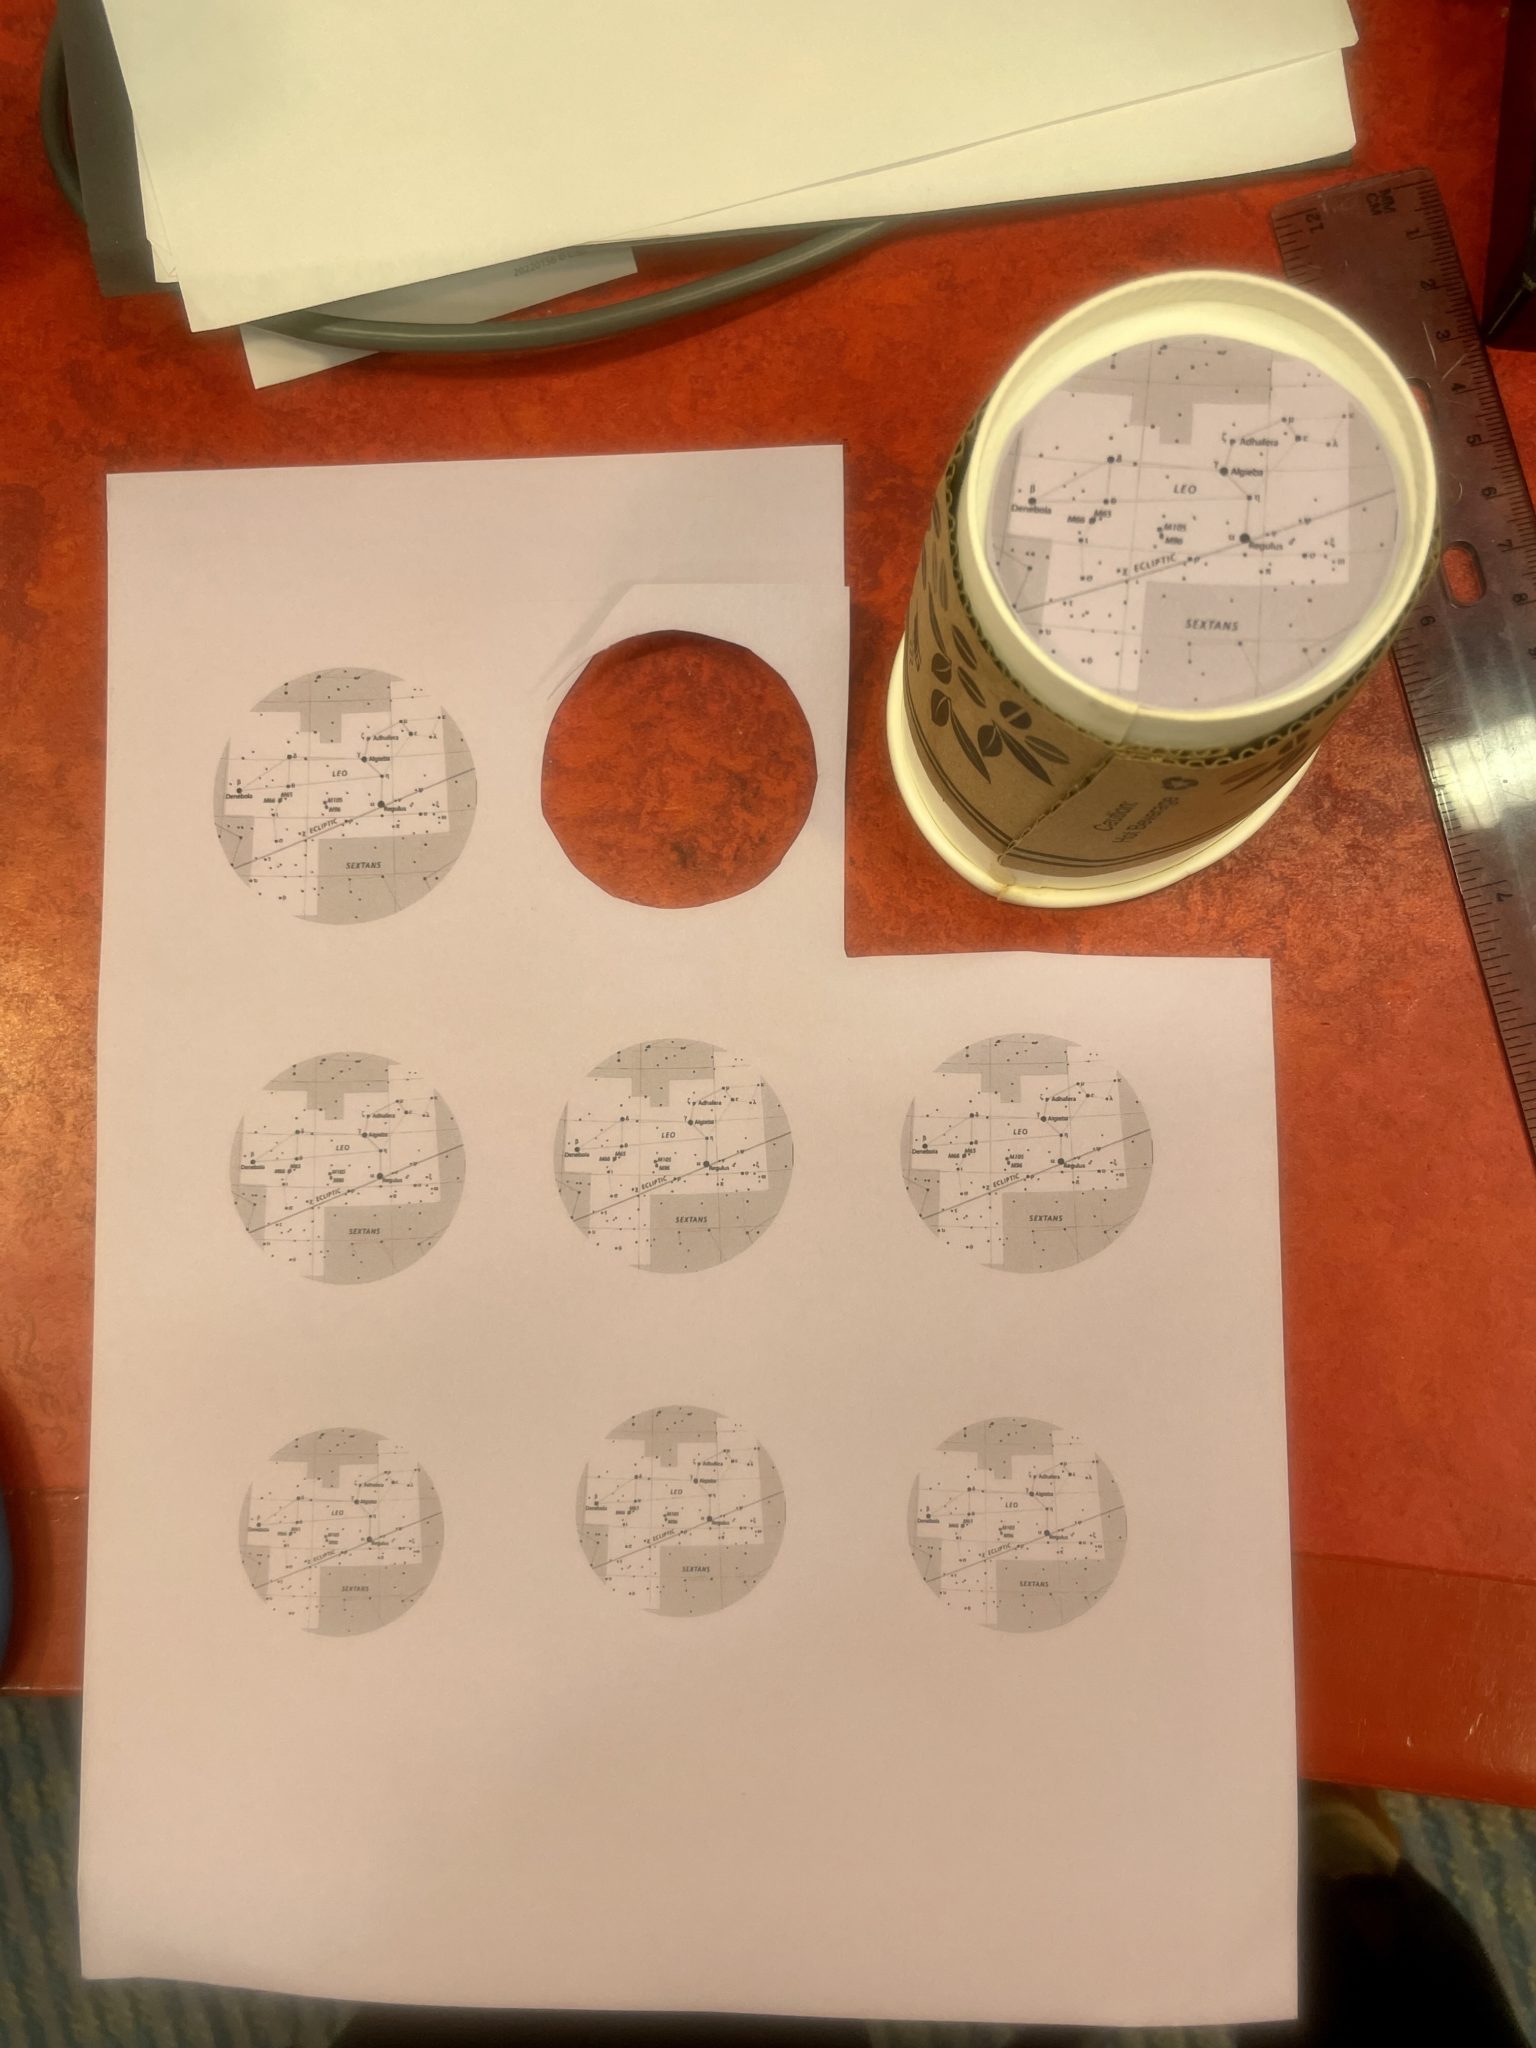 Image of purple/gray sheet of paper with star-maps printed on it, situated next to a paper coffee cup turned upside down. The top right corner of the sheet is cut off and a circle is cut out of the top center. A circular map (cut out from the top-center of the sheet) is placed on the bottom of the upside-down cup to demonstrate the correct sizing needed for the map if using a paper cup for this craft.